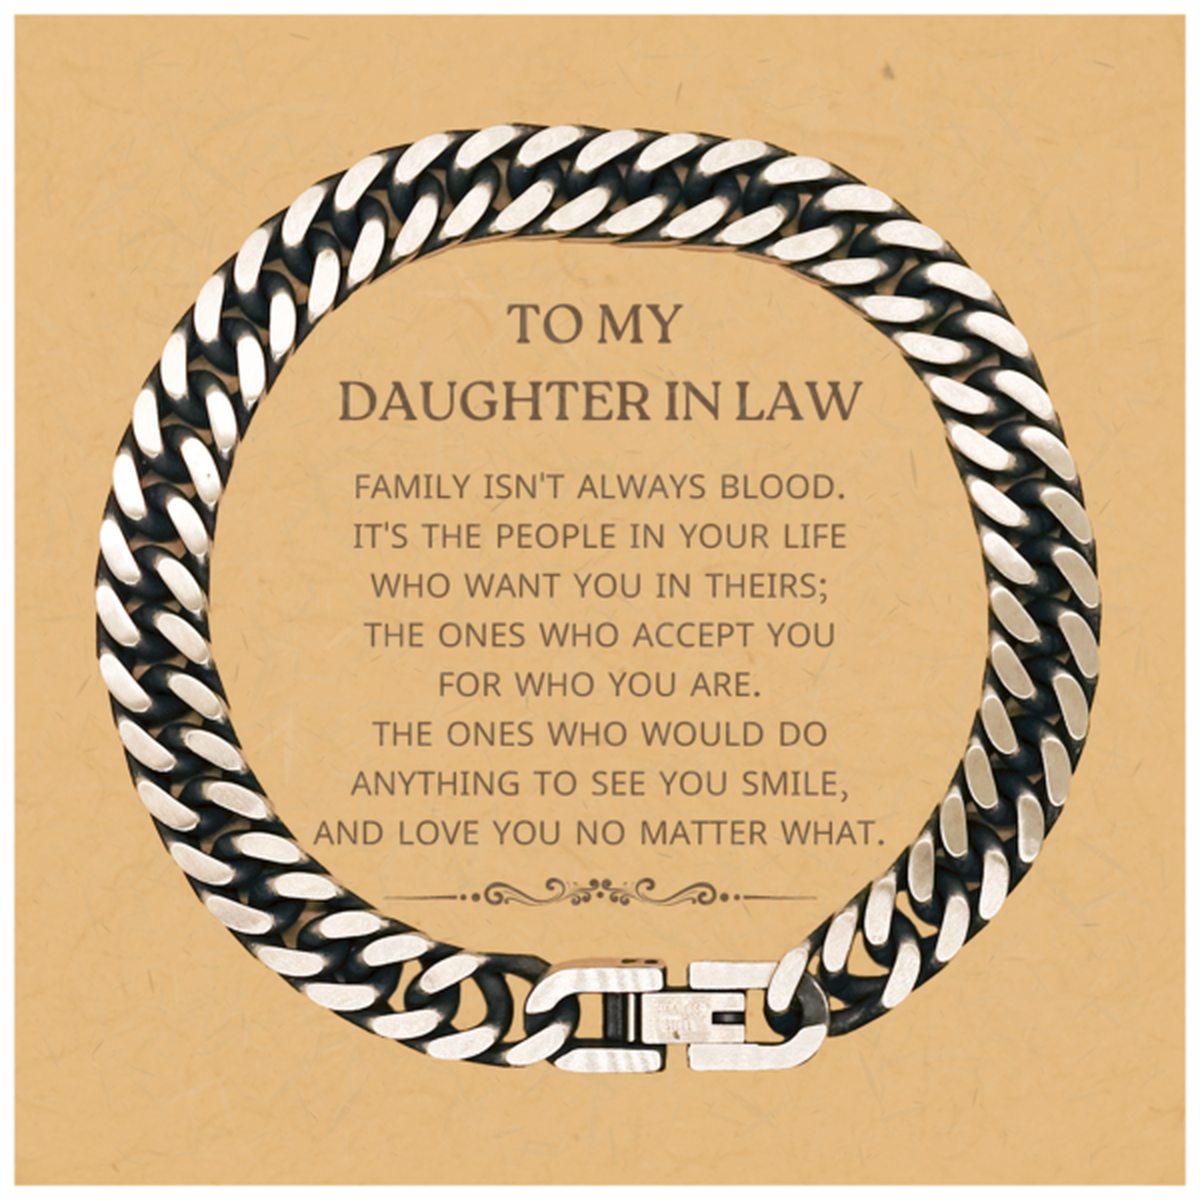 To My Daughter In Law Gifts, Family isn't always blood, Daughter In Law Cuban Link Chain Bracelet, Birthday Christmas Unique Present For Daughter In Law